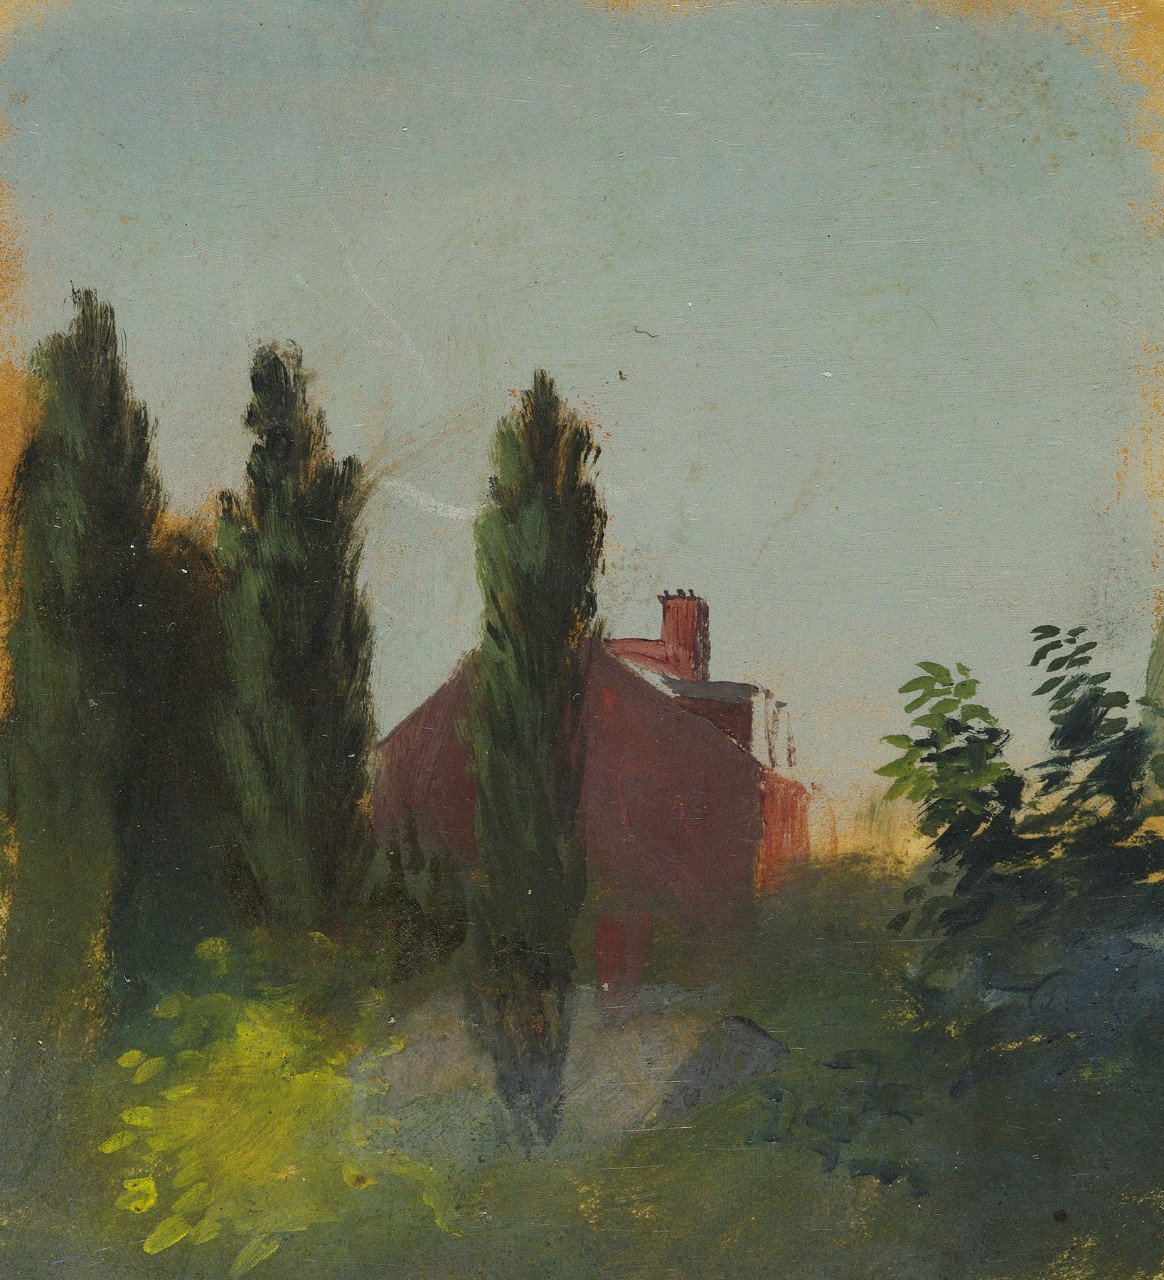 Landscape at sunset of a red house